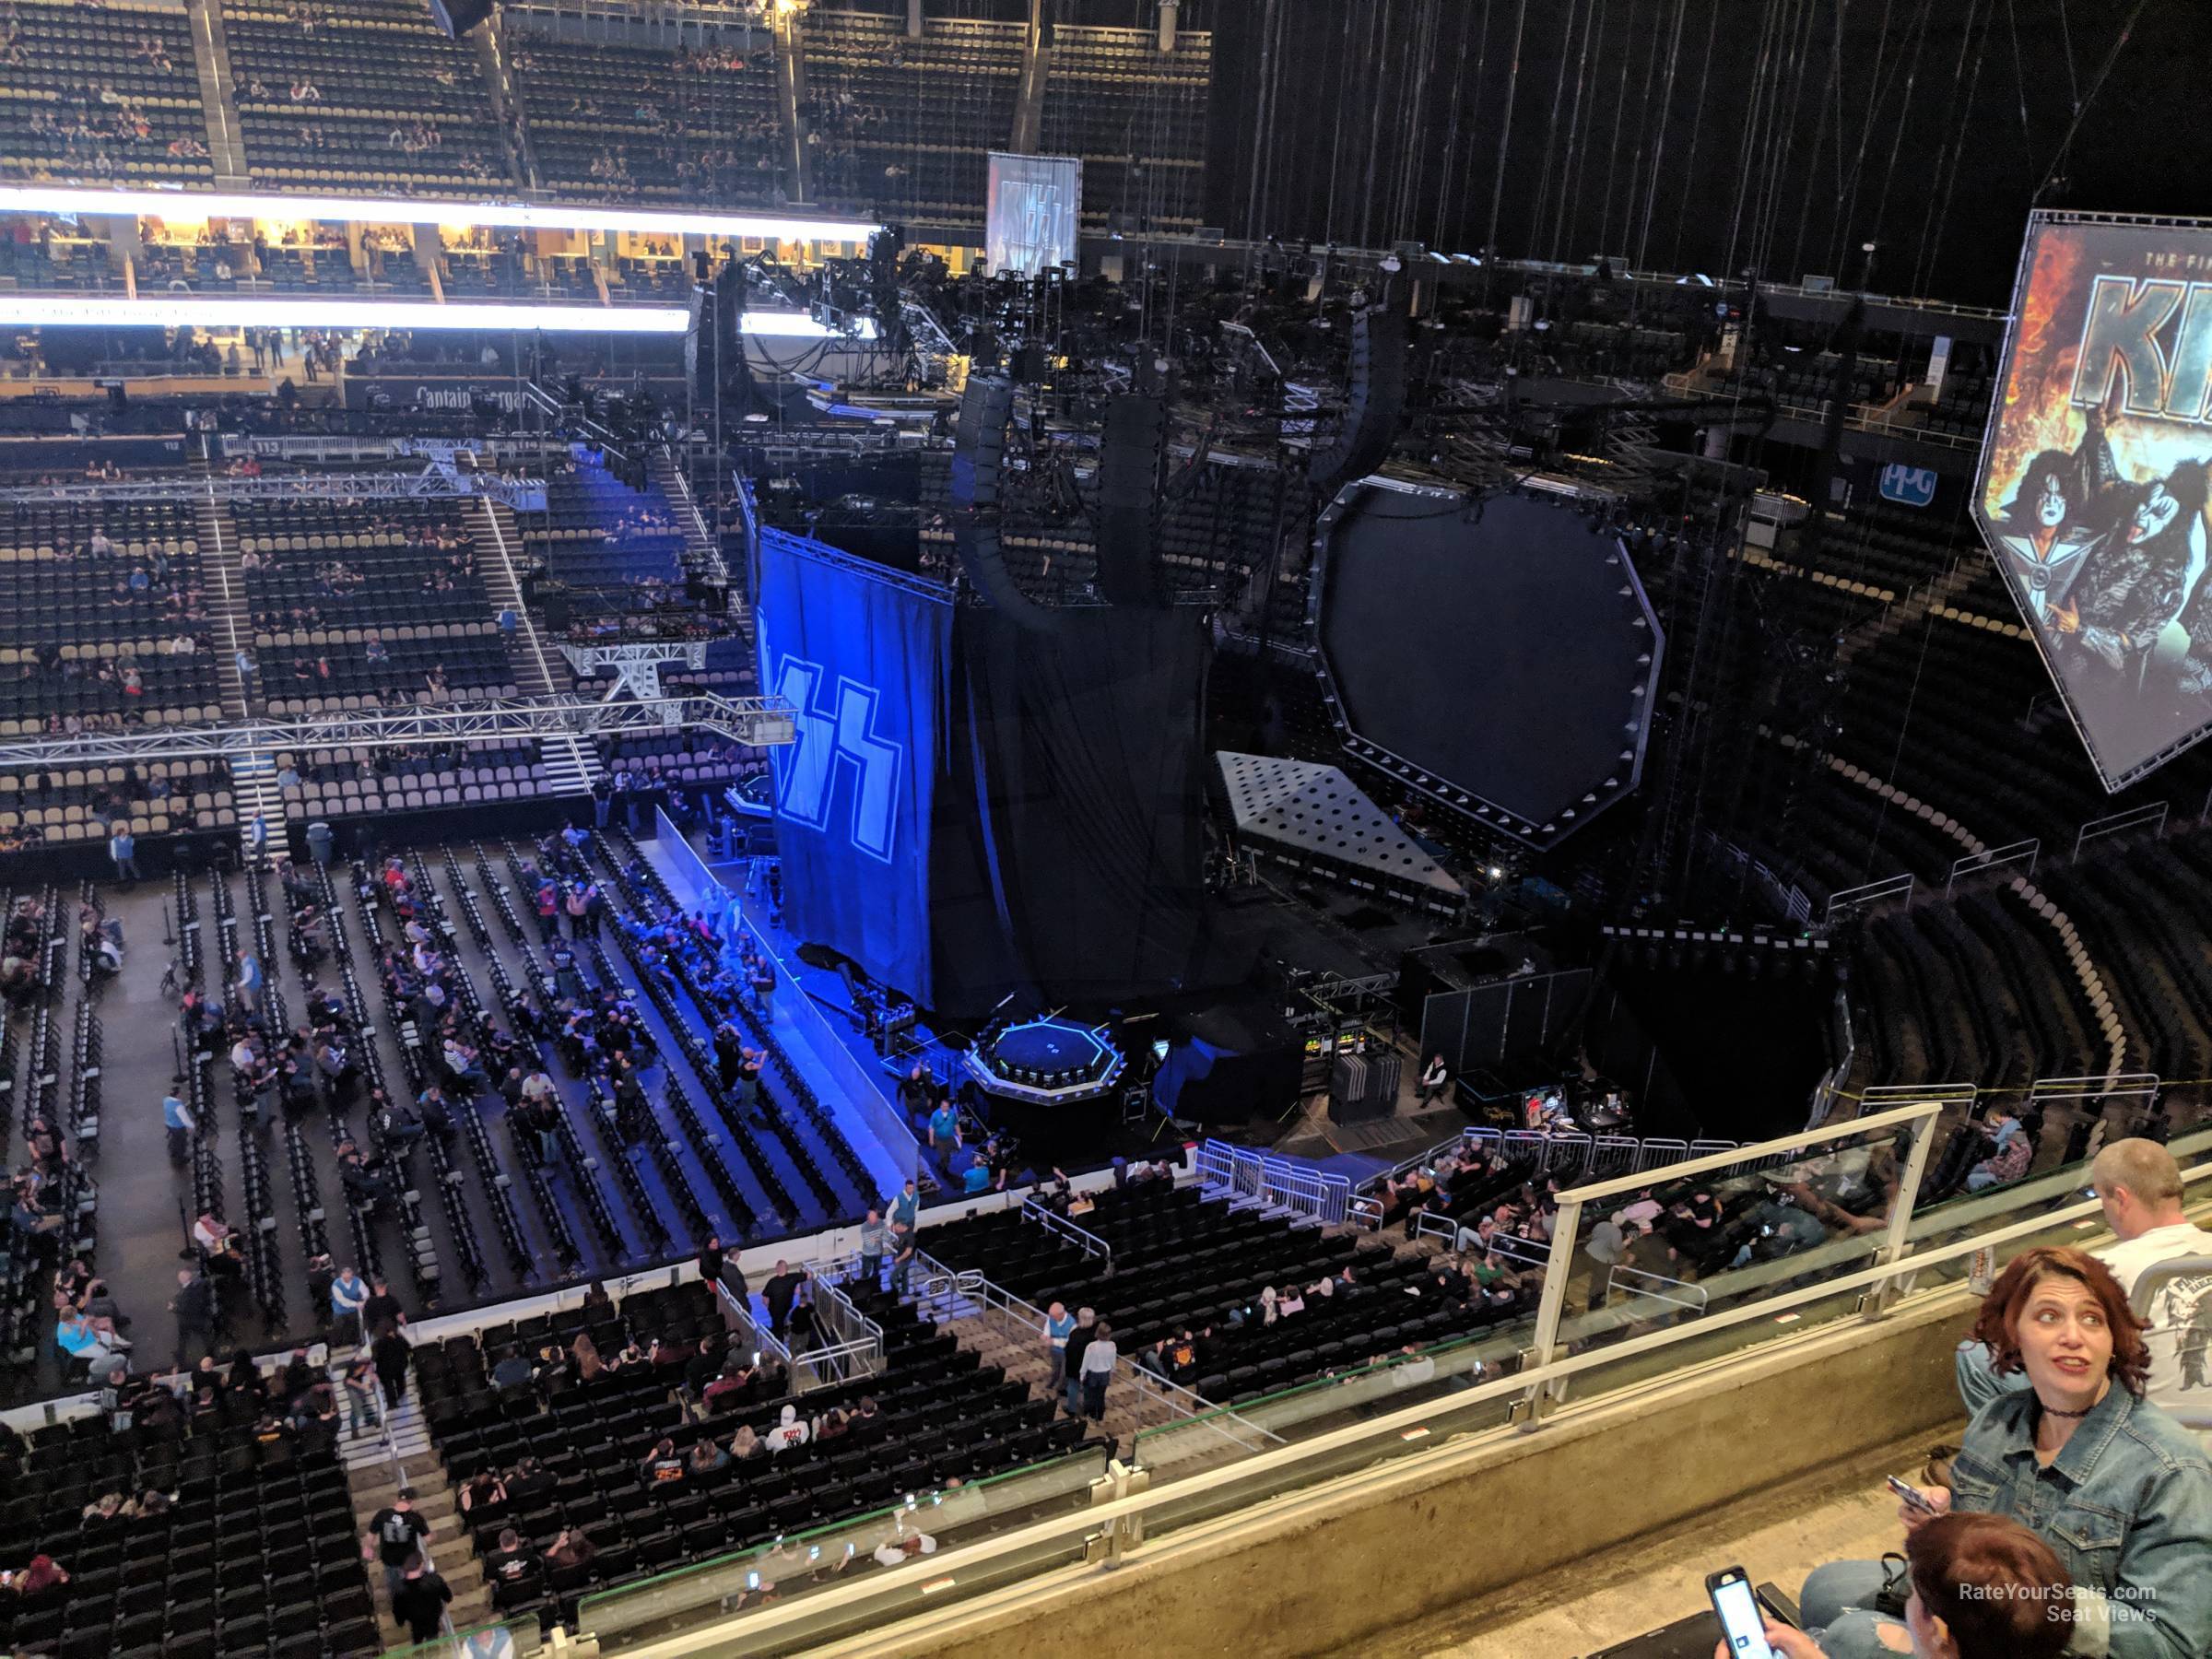 section 202, row c seat view  for concert - ppg paints arena